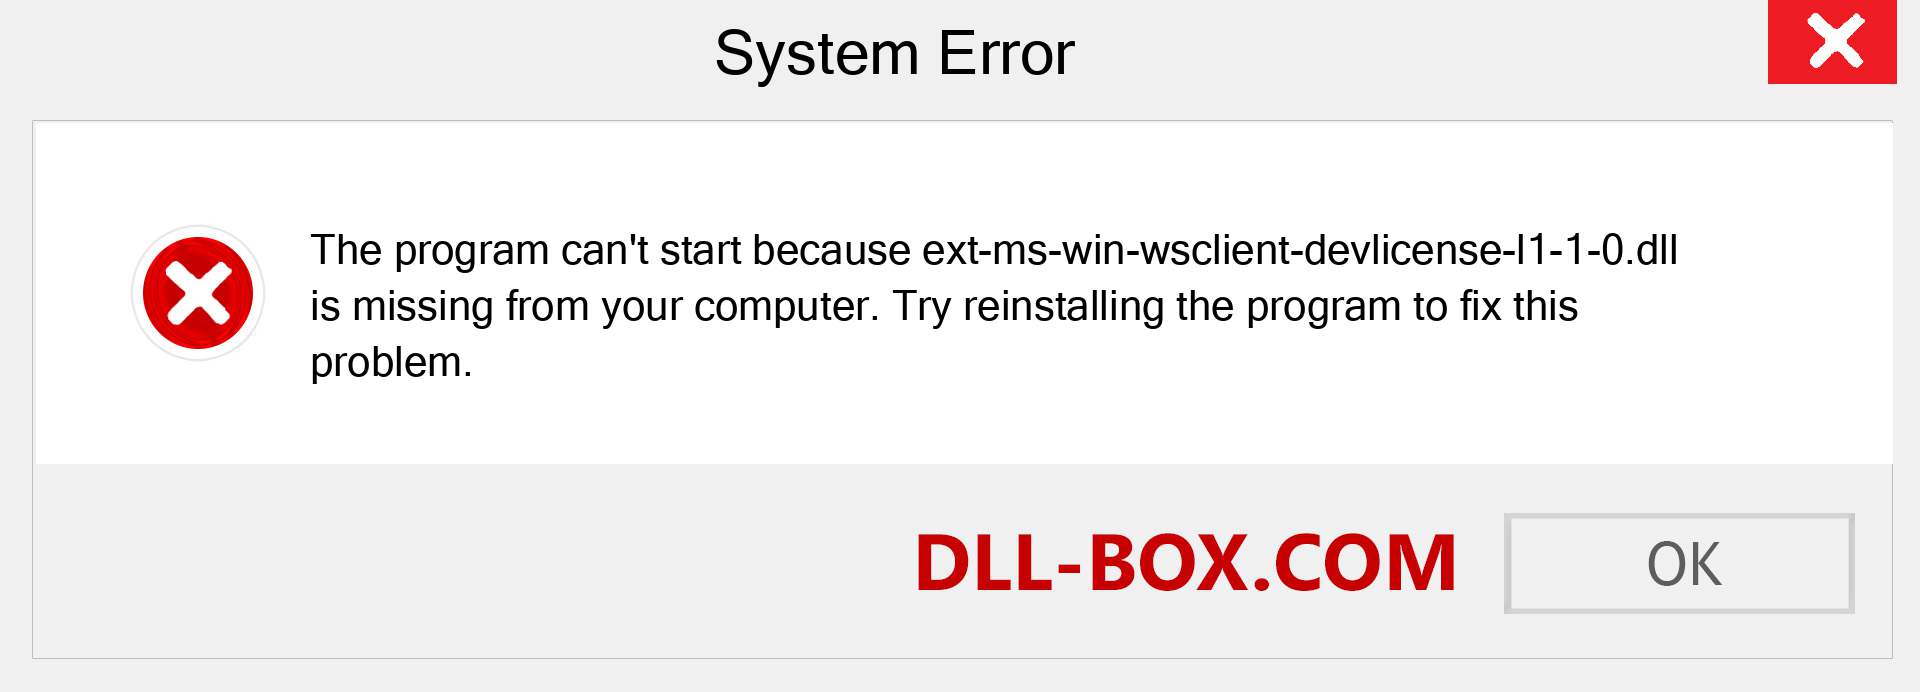  ext-ms-win-wsclient-devlicense-l1-1-0.dll file is missing?. Download for Windows 7, 8, 10 - Fix  ext-ms-win-wsclient-devlicense-l1-1-0 dll Missing Error on Windows, photos, images